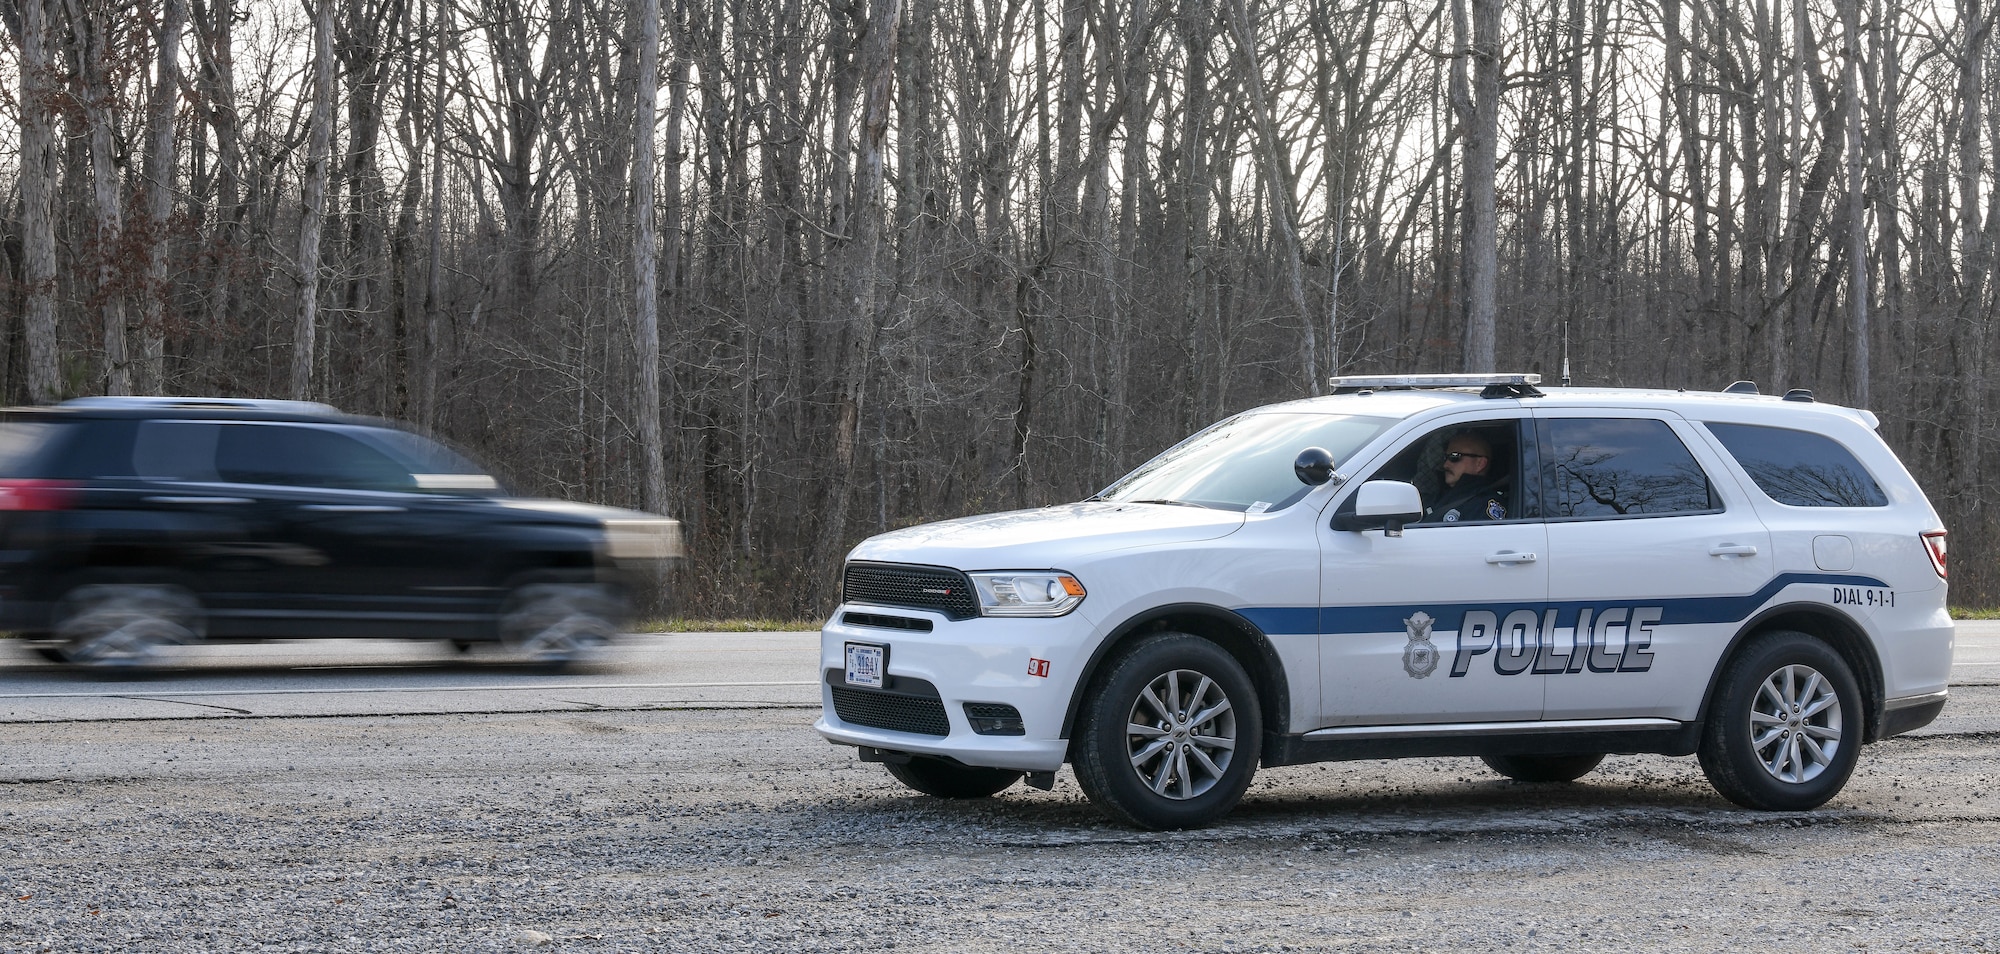 Sgt. George Blasingame, a Dept. of the Air Force Police Officer at Arnold Air Force Base, Tenn., parks at a pull-off along Wattendorf Highway to watch for motorists committing moving violations, Dec. 17, 2020. DAF Officers began patrolling Arnold in late August. The SUV driven by Blasingame was recently acquired for the new force, and another SUV is also on order. Motorists traveling Arnold AFB roadways should be mindful that the DAF officers can issue citations for moving violations. Motorists who are cited for moving violations on Arnold AFB property are assessed points. Points are entered into the Air Force Justice Information System and assessed against their on-base driving record. Accumulation of 12 points in 12 months or 18 points in 24 months normally results in loss of driving privileges for up to a year. If someone gets caught driving during their revocation period, an additional year is usually added to the penalty. (U.S. Air Force photo by Jill Pickett)